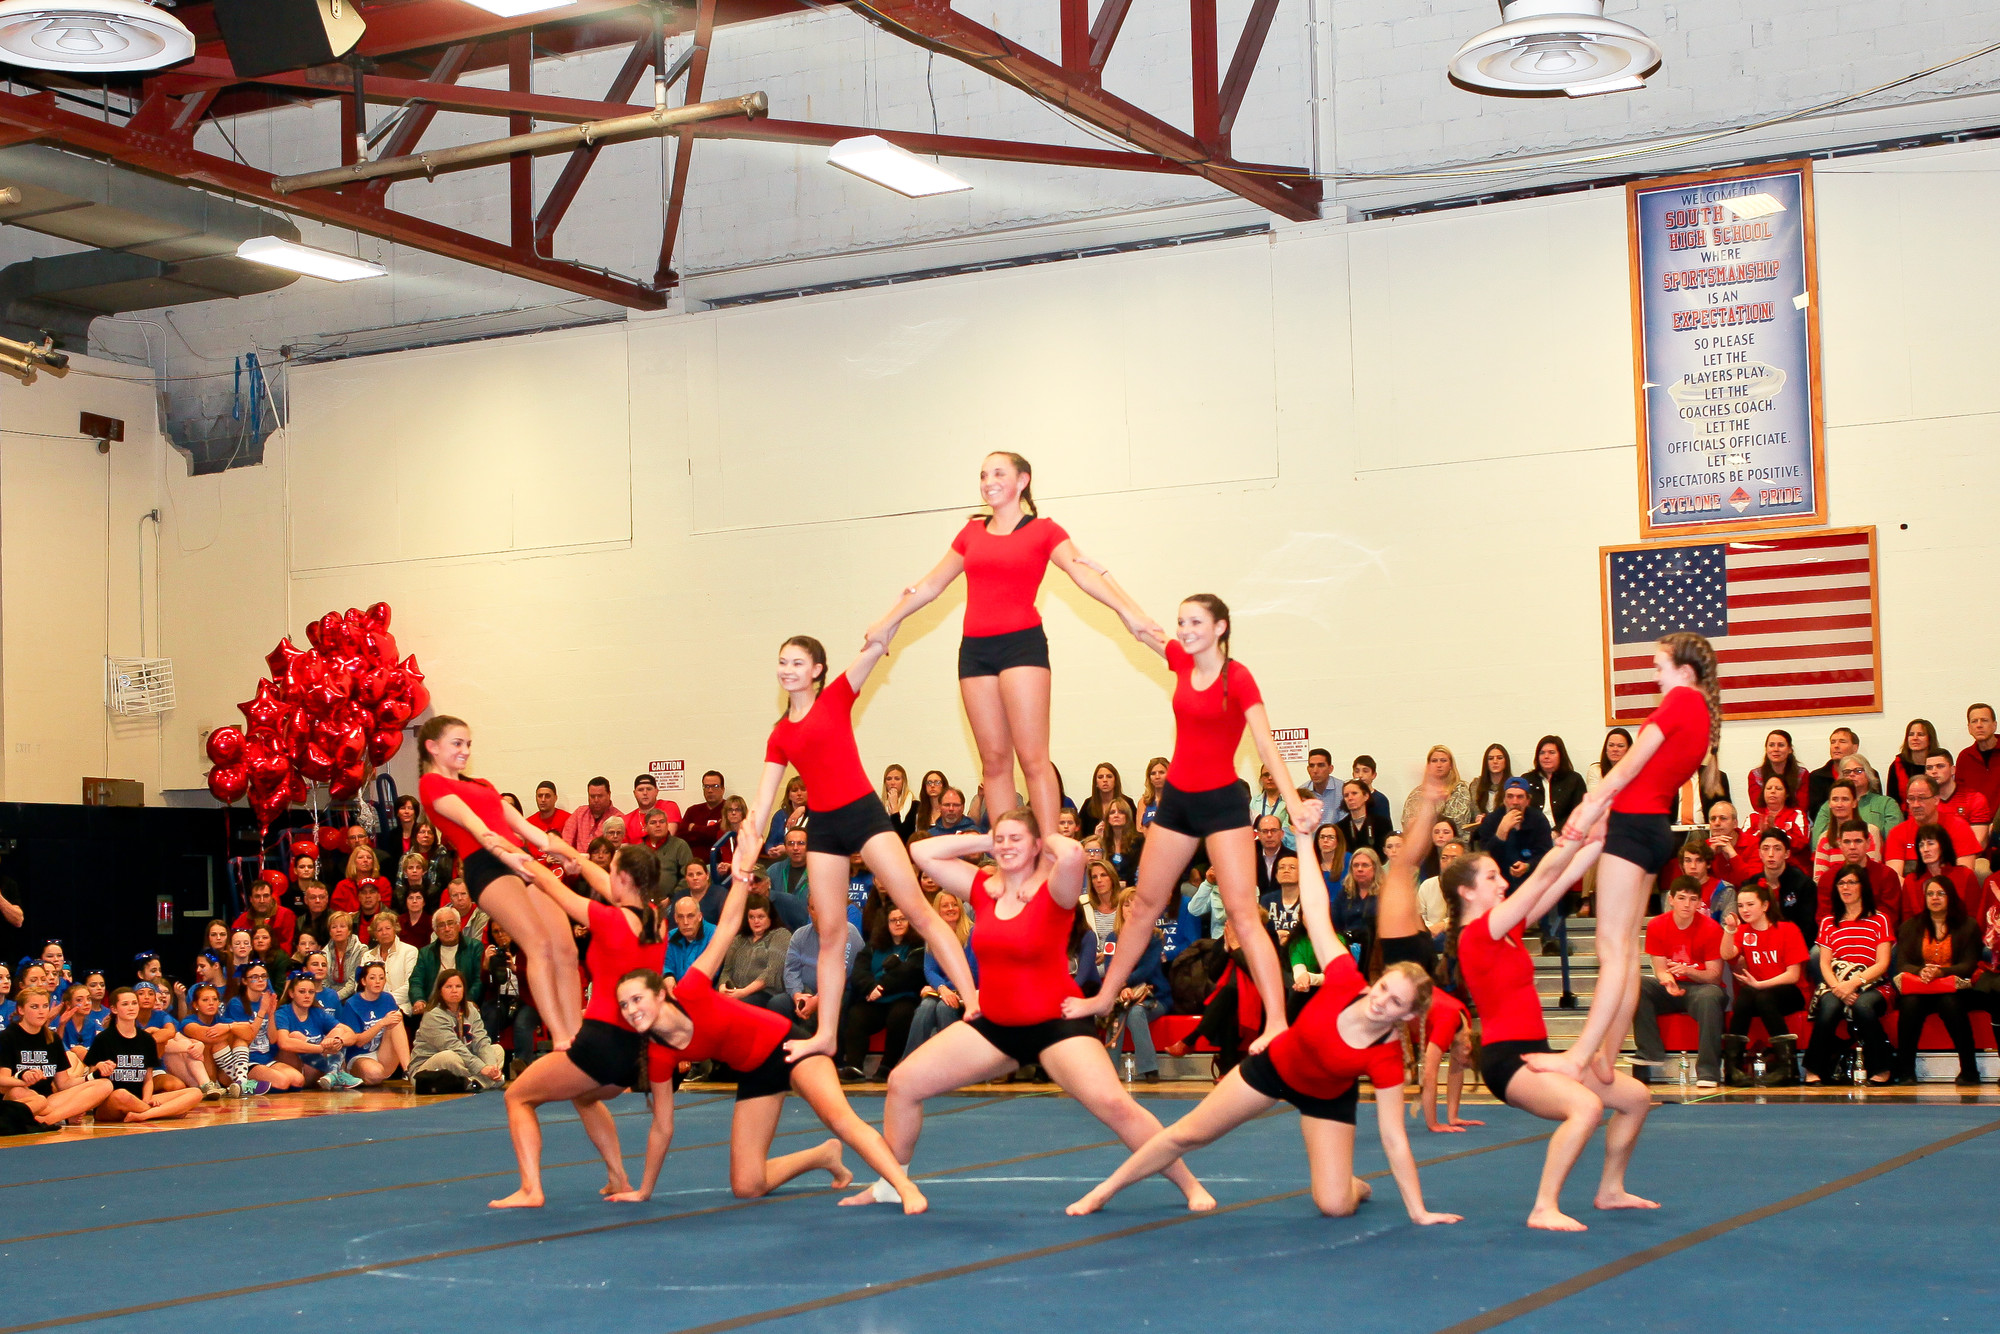 Red Team tumblers formed an impressive human pyramid.